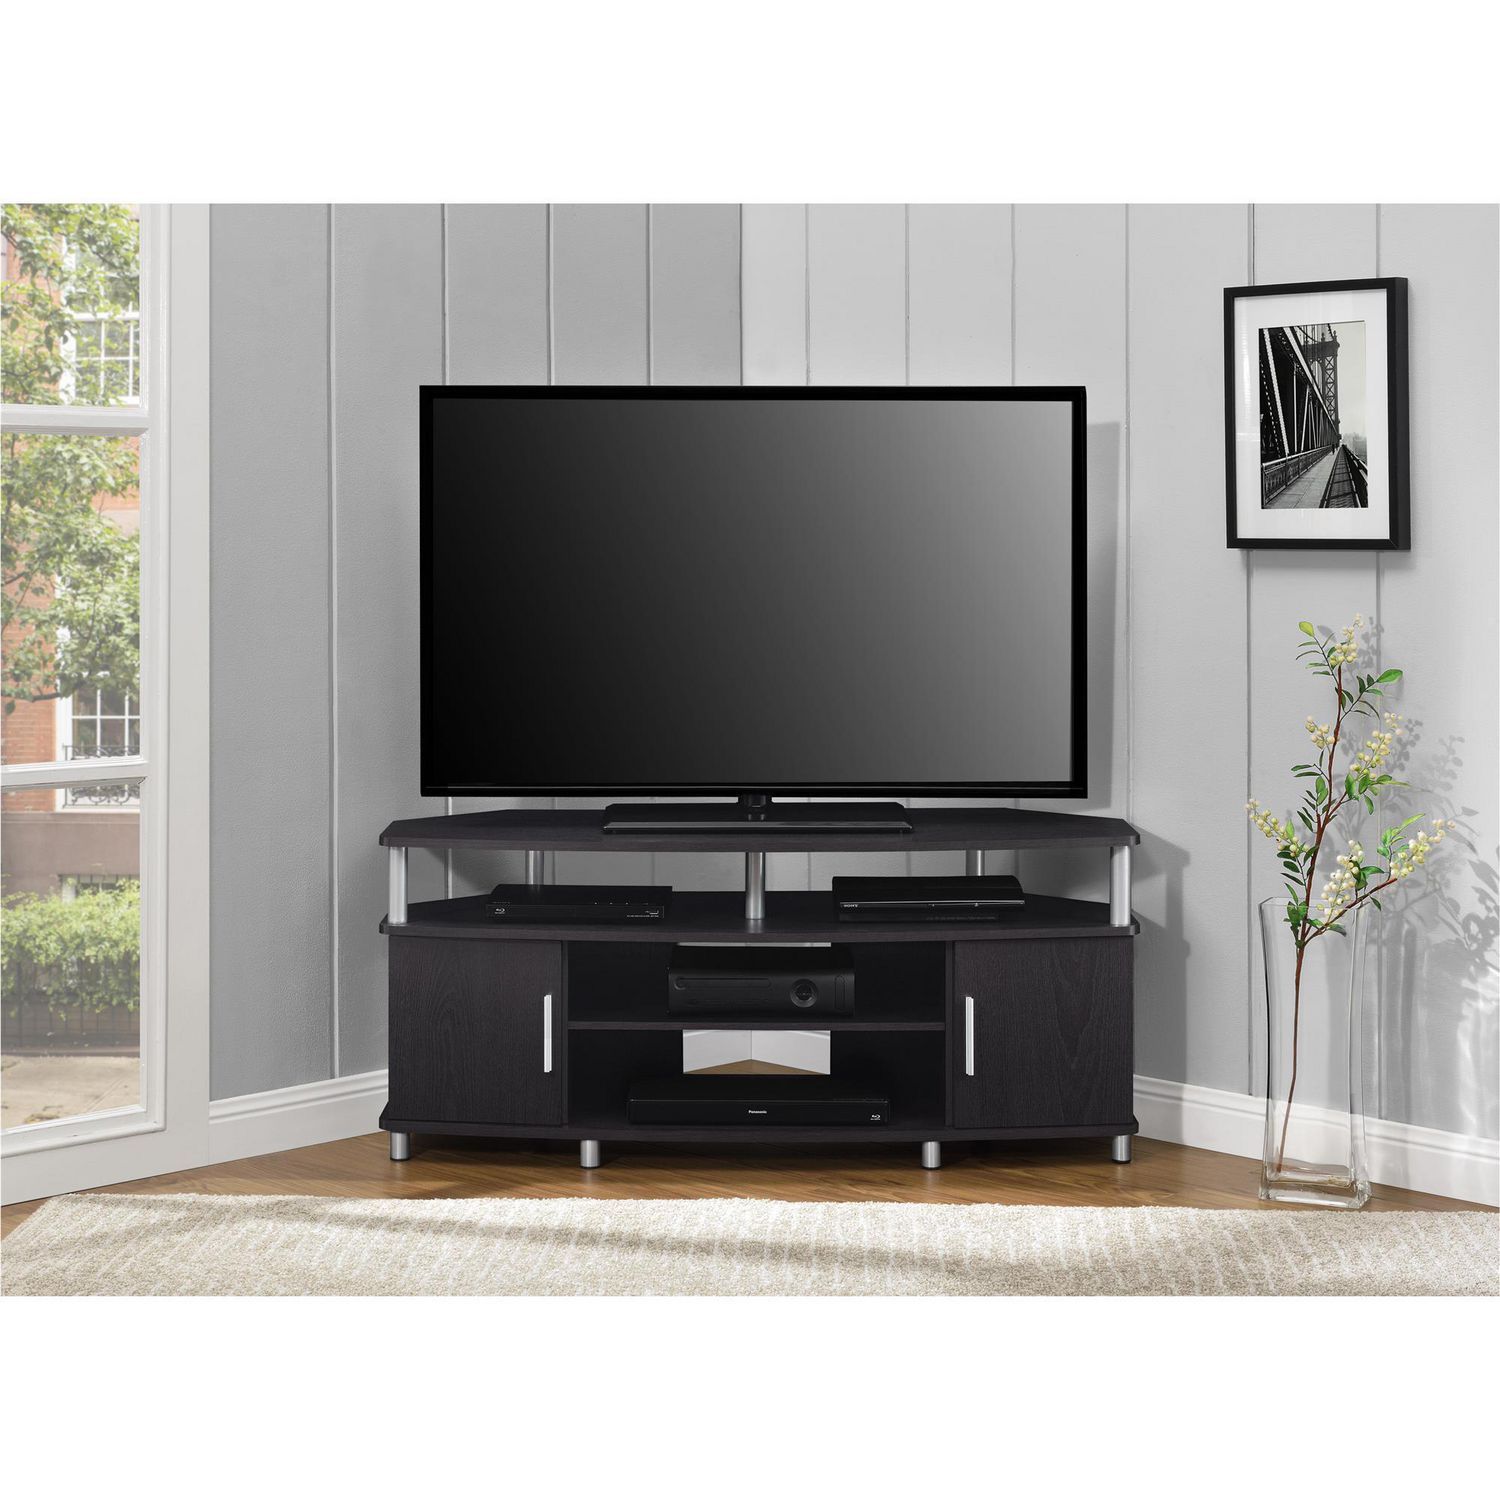 Carson Corner Tv Stand For Tvs Up To 50", Black/cherry In Corner Tv Stands For 50 Inch Tv (View 4 of 15)